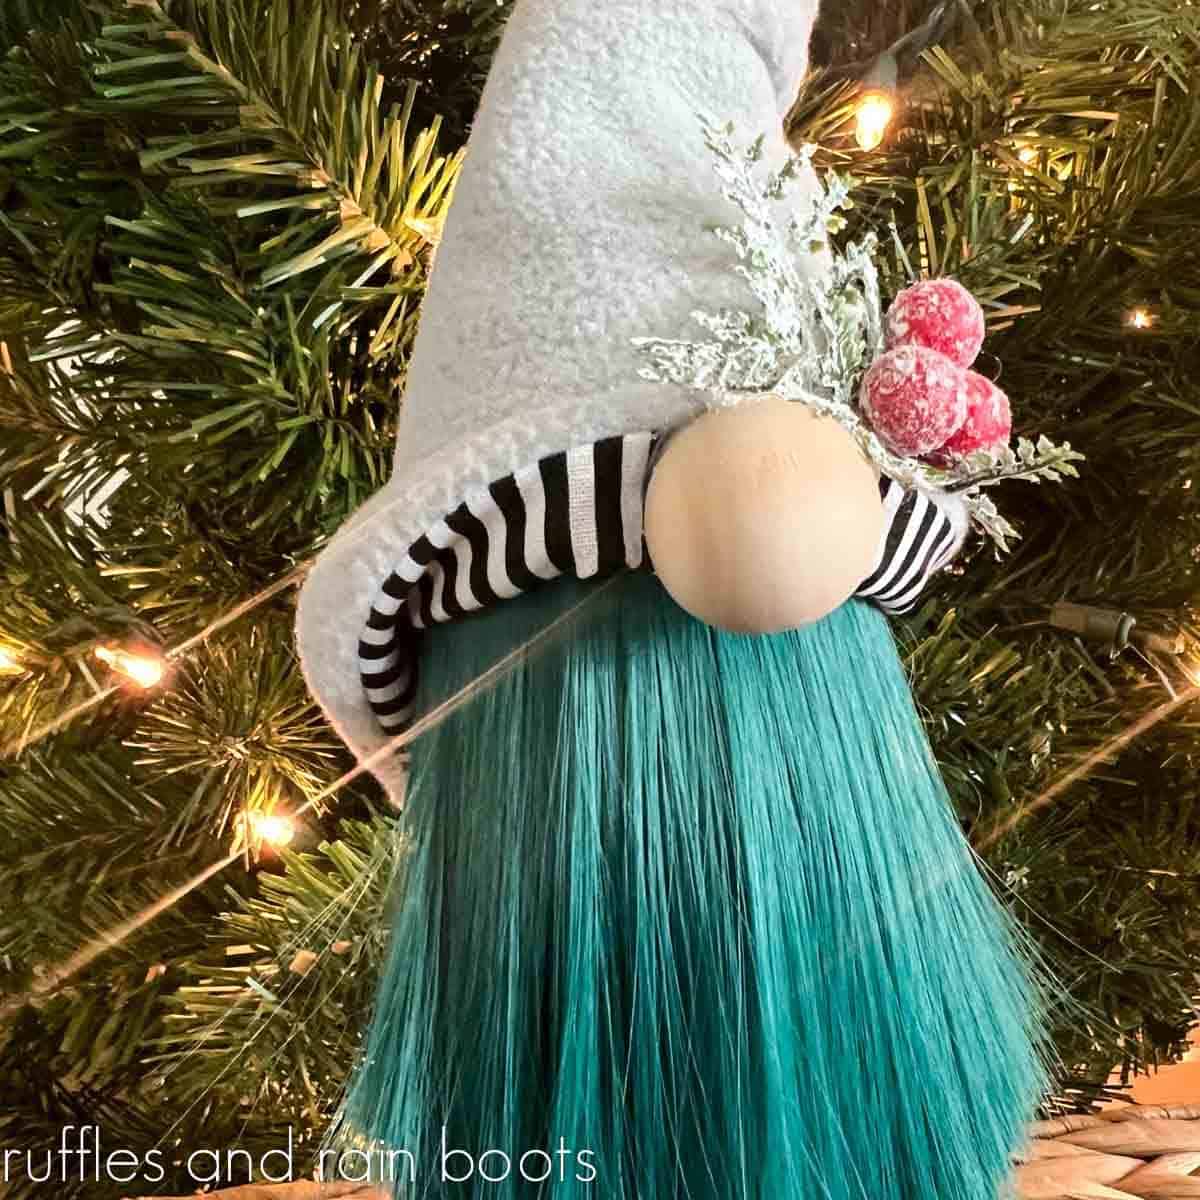 Close up image of a holiday gnome with a green doll hair beard, a reversible gnome hat, and a large wooden nose in front of a Christmas tree.